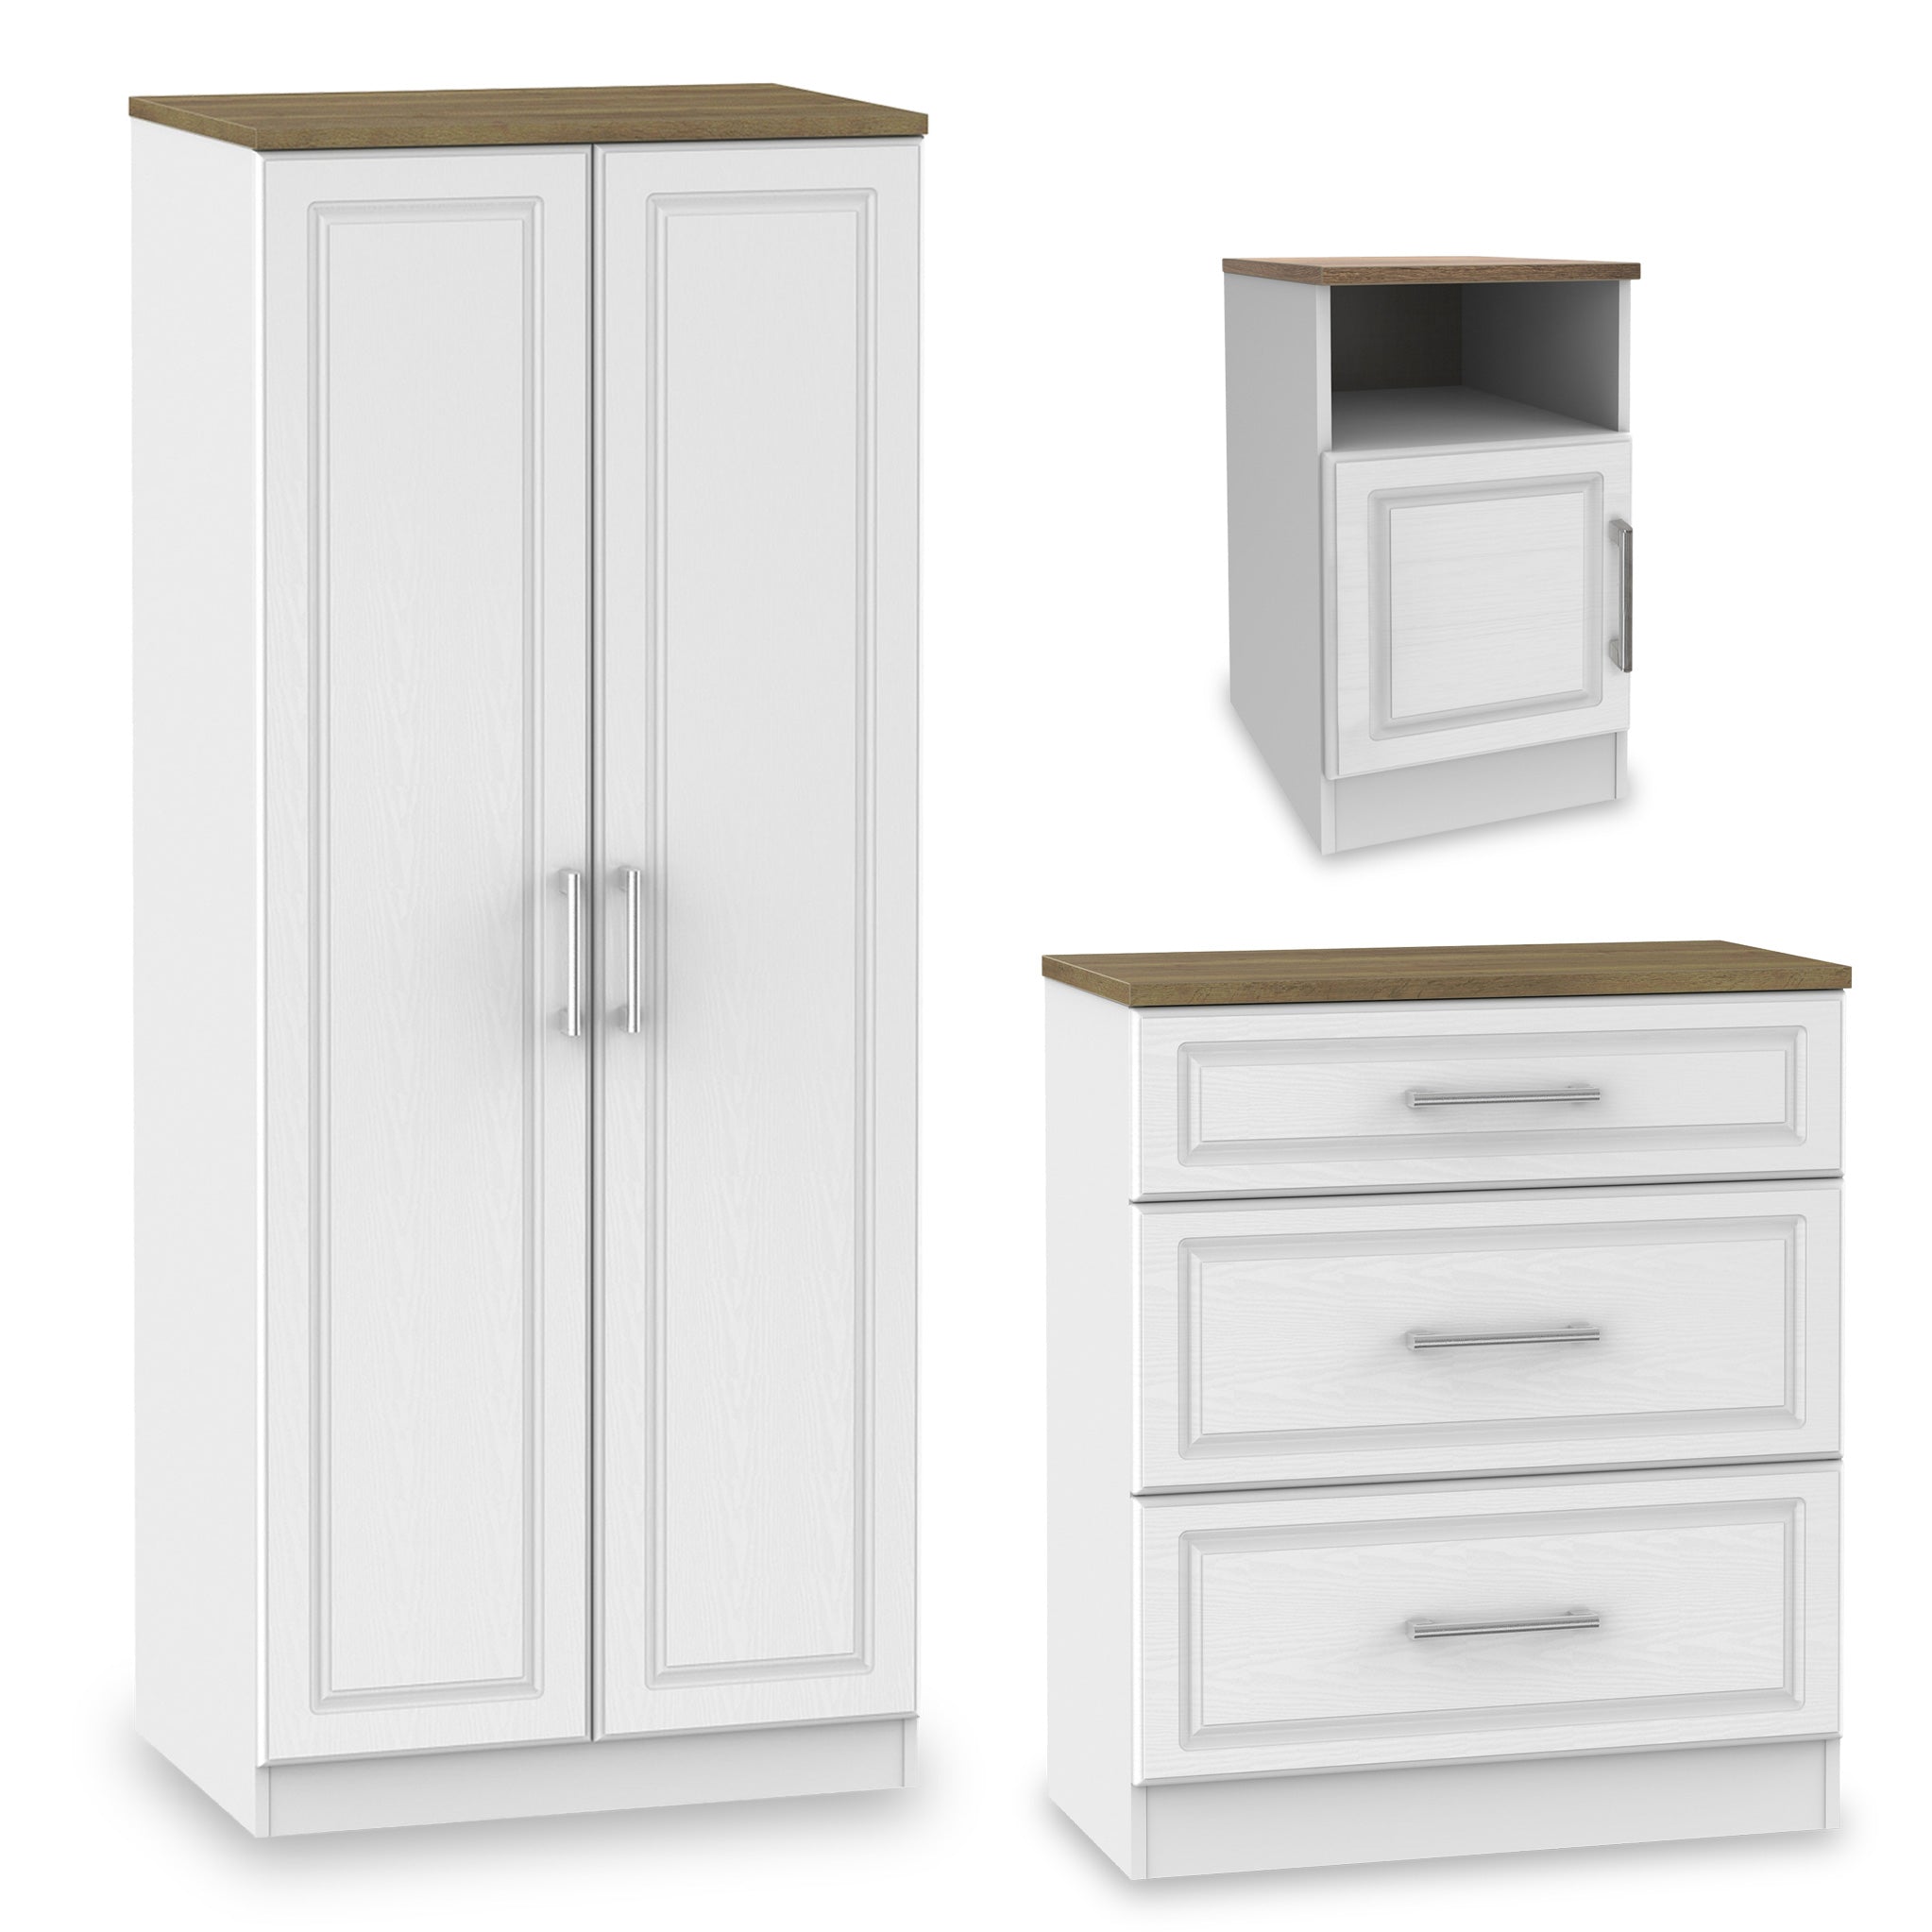 Talland 3 Piece Bedroom Set White Grey Taupe Wardrobe Chest Bedside